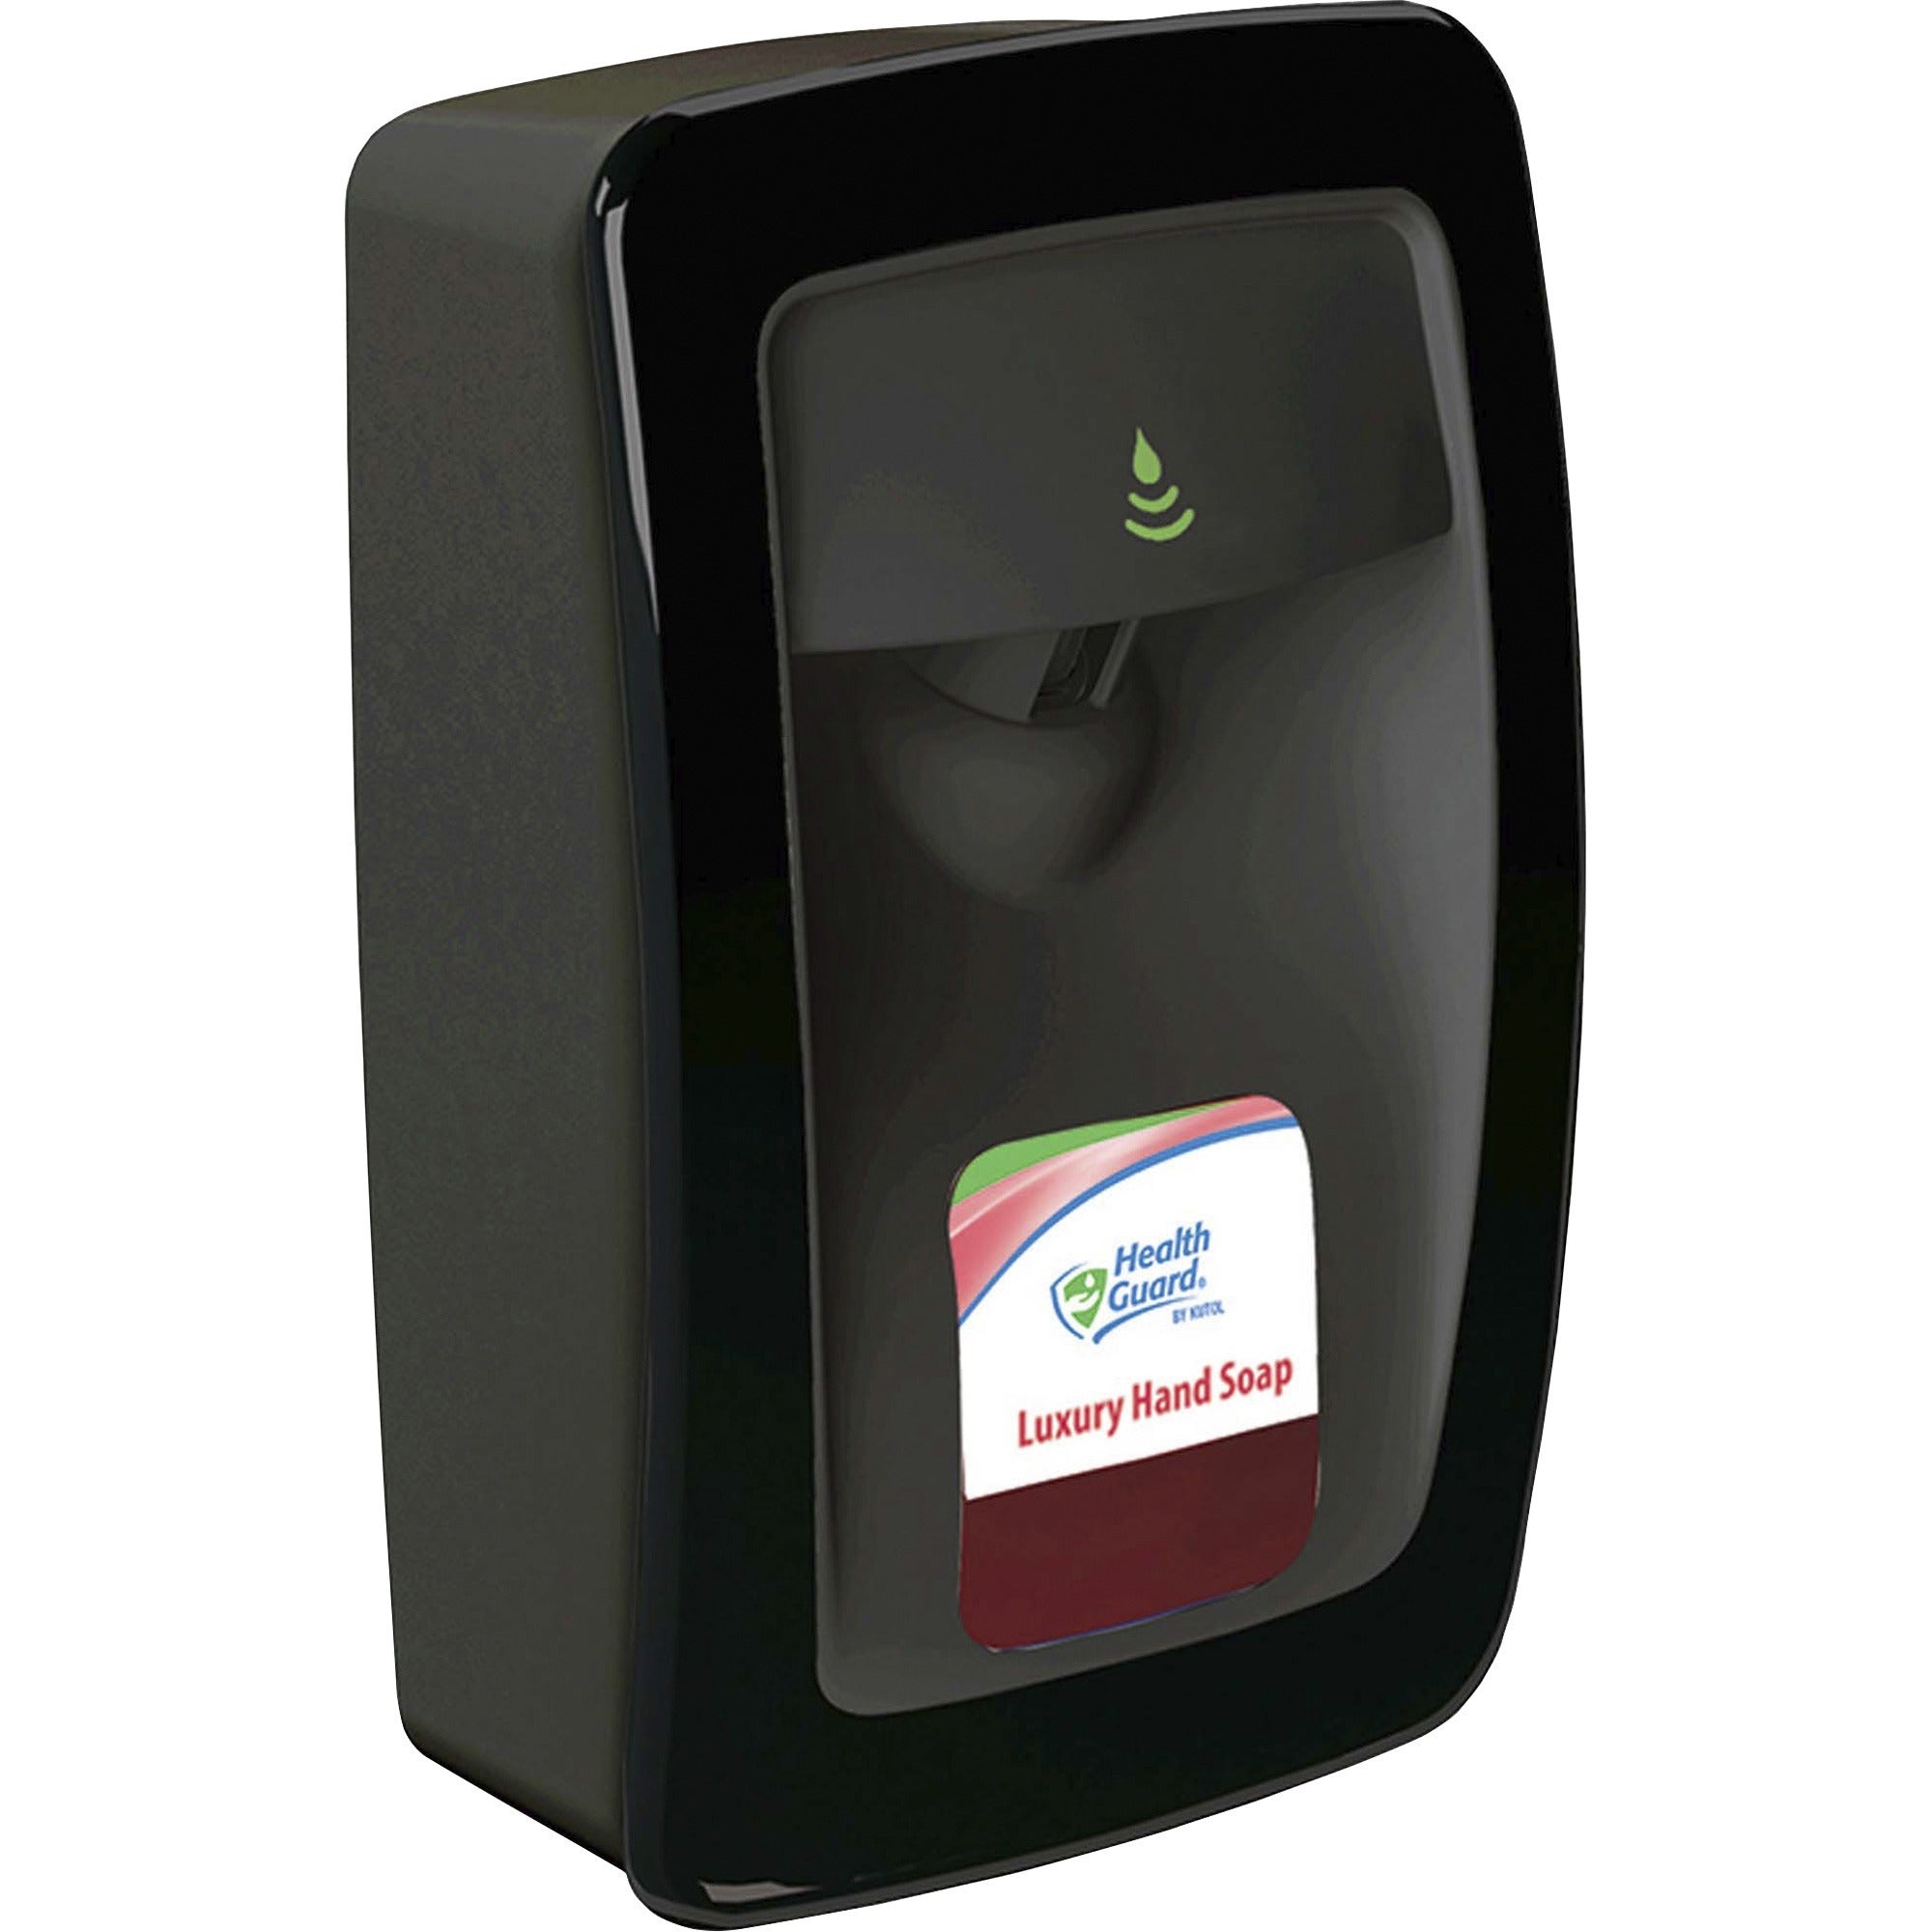 health-guard-designer-series-no-touch-dispenser-automatic-106-quart-capacity-support-4-x-c-battery-touch-free-key-lock-refillable-black-1each_kutns011bk31 - 2